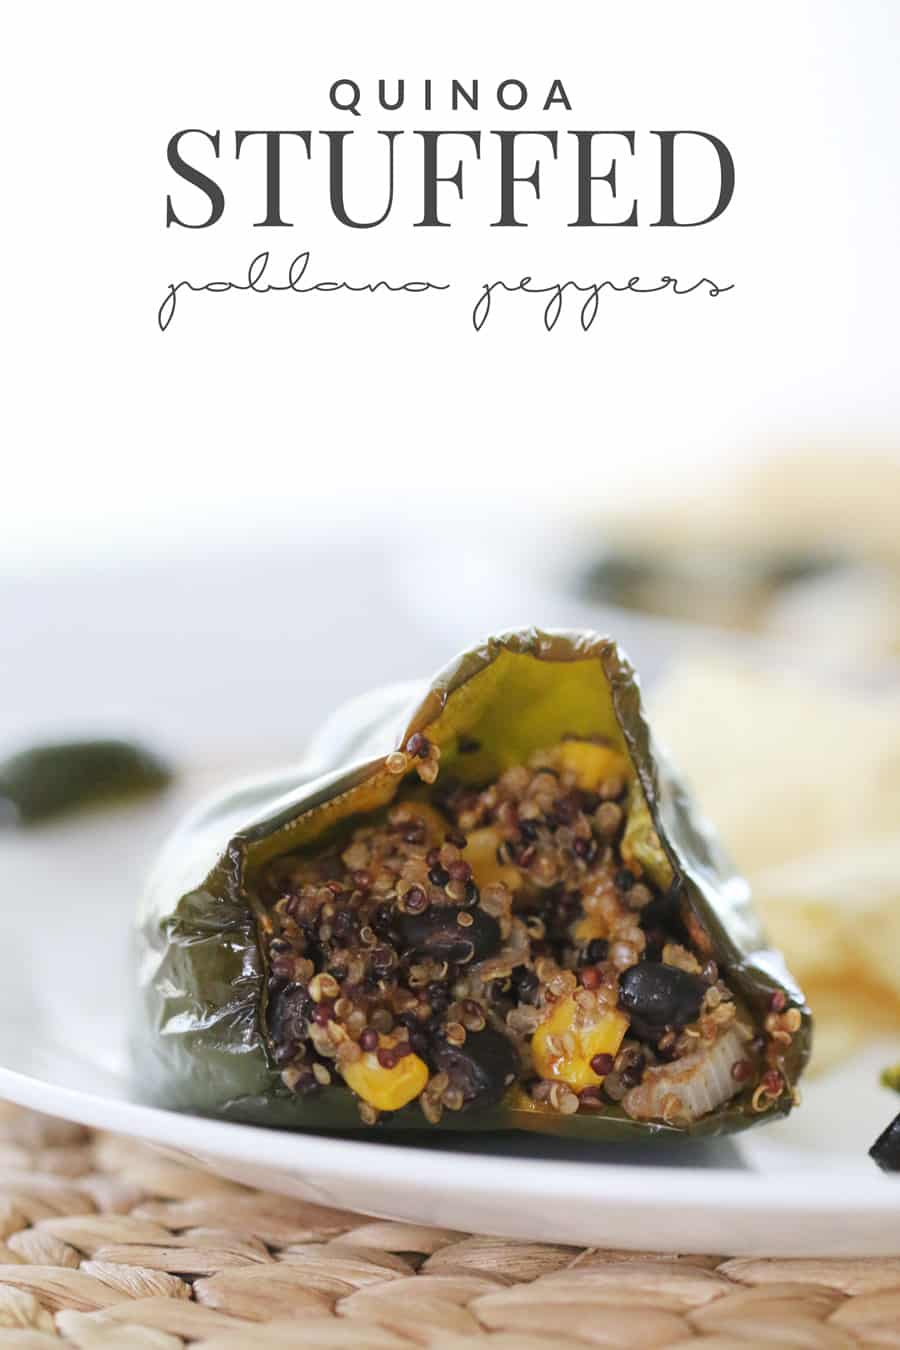 A delicious blend of black beans, corn, onions, and cheese mixed inside of quinoa stuffed peppers. It's hearty, scrumptious and not to spicy!